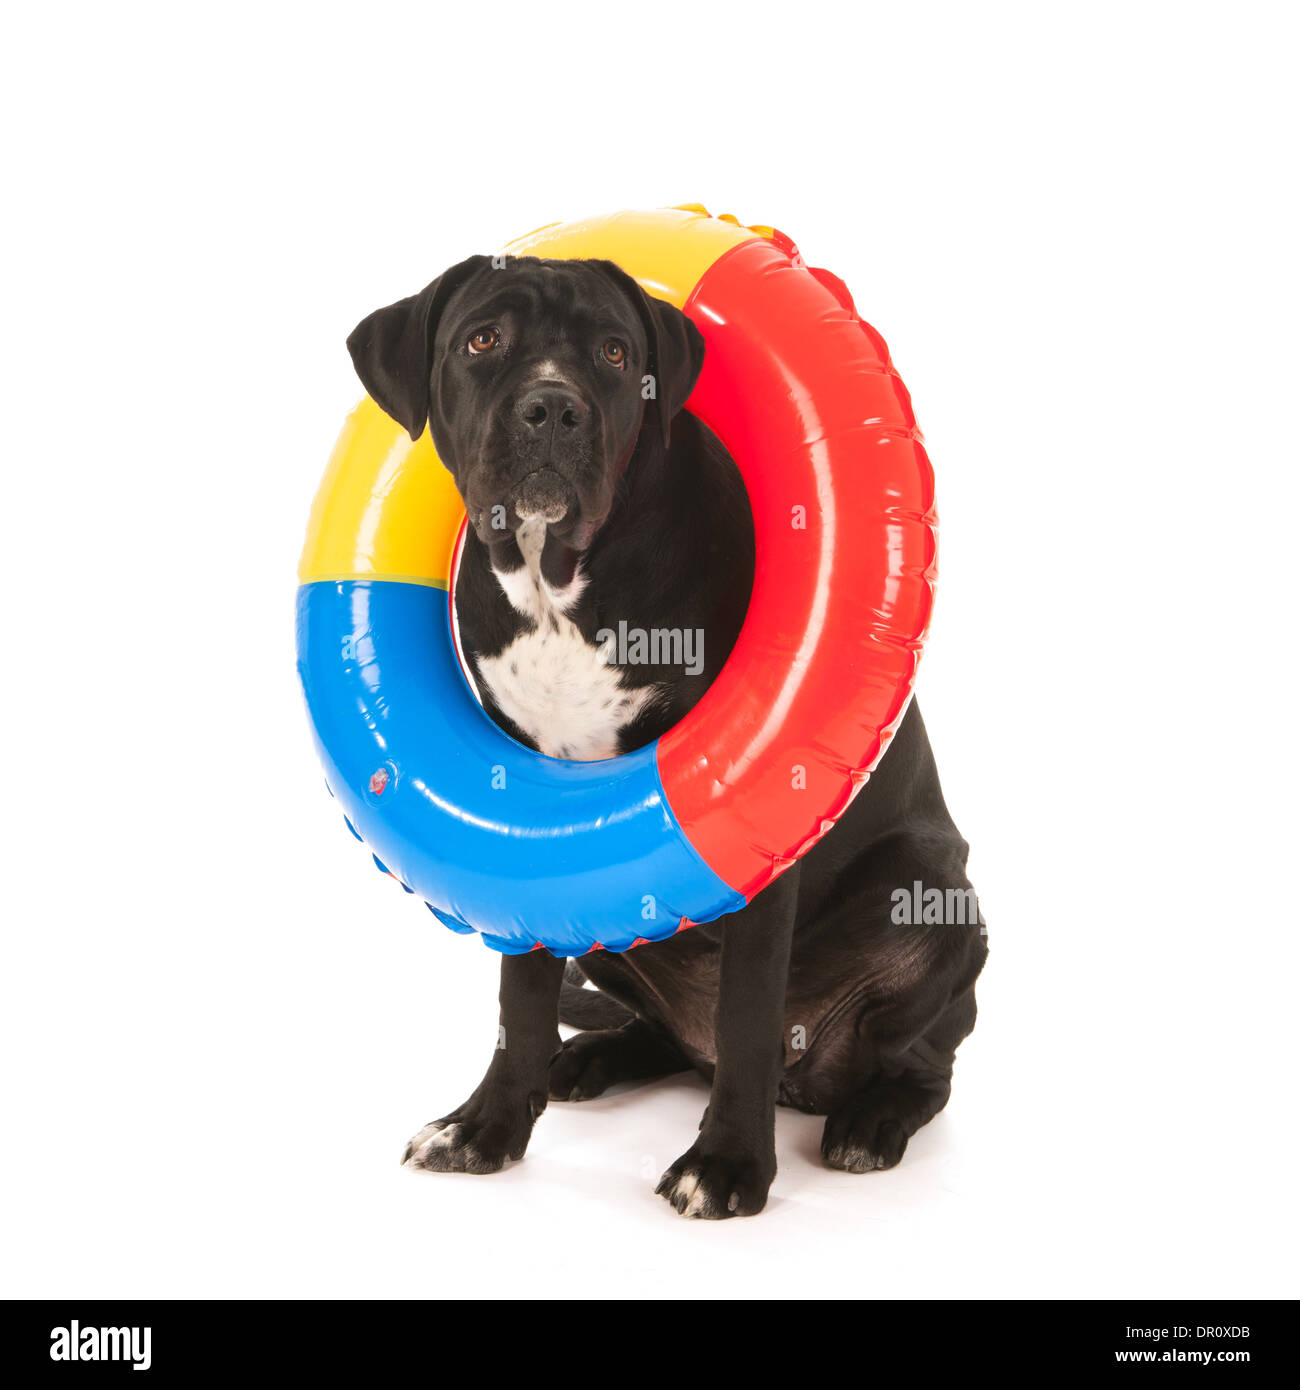 dog on vacation with green inflatable swimming tool Stock Photo